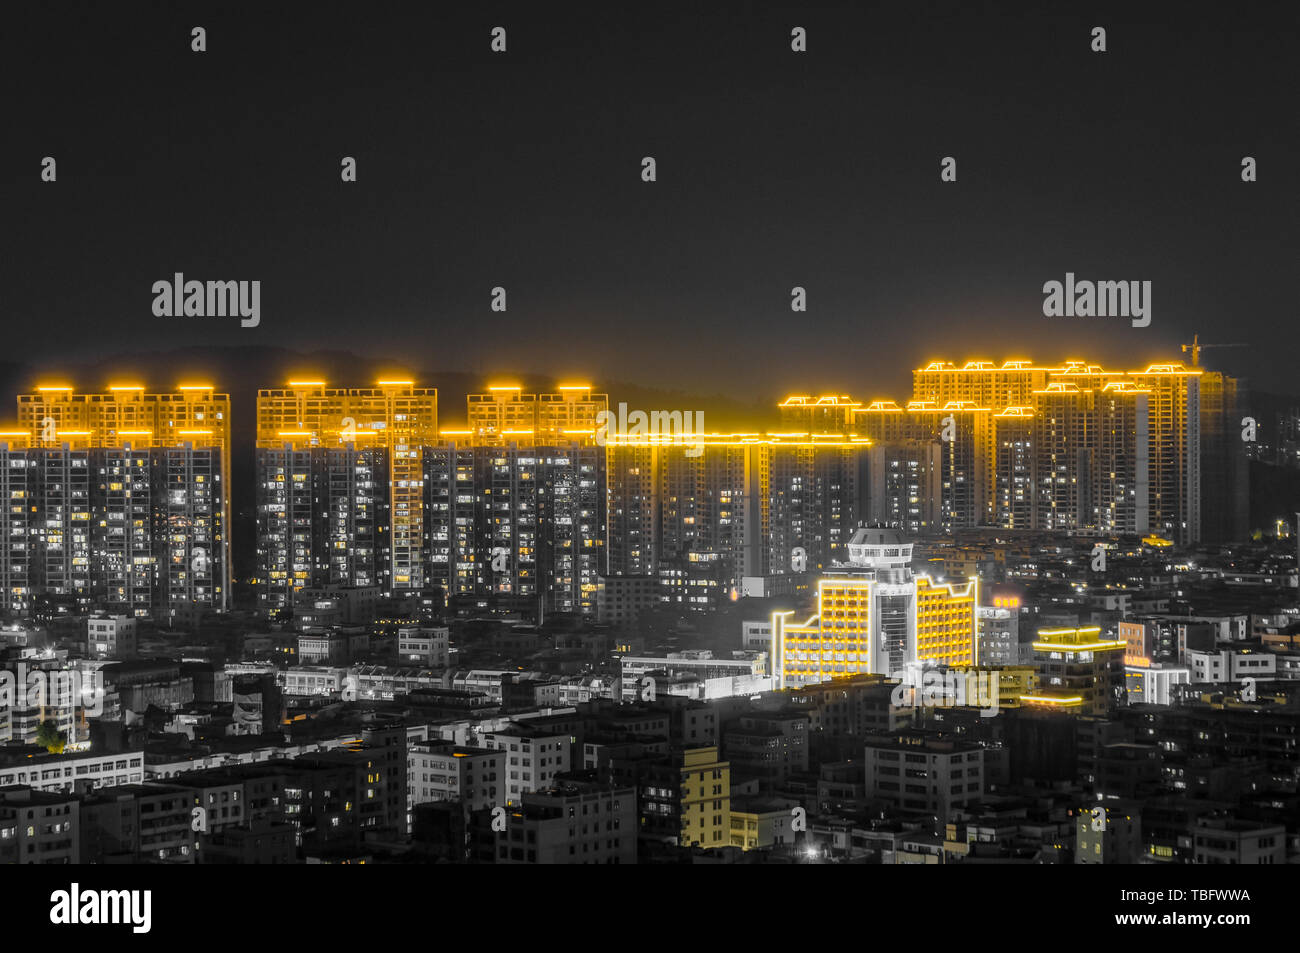 Photographed in Chaoyang District, Shantou City. Photographed using Nikon D90. Post processing into black and gold shades. The low @ - @ rise buildings in the foreground contrasted with the high @ - @ rise buildings of the vision, reflecting the speed of urbanization! Stock Photo